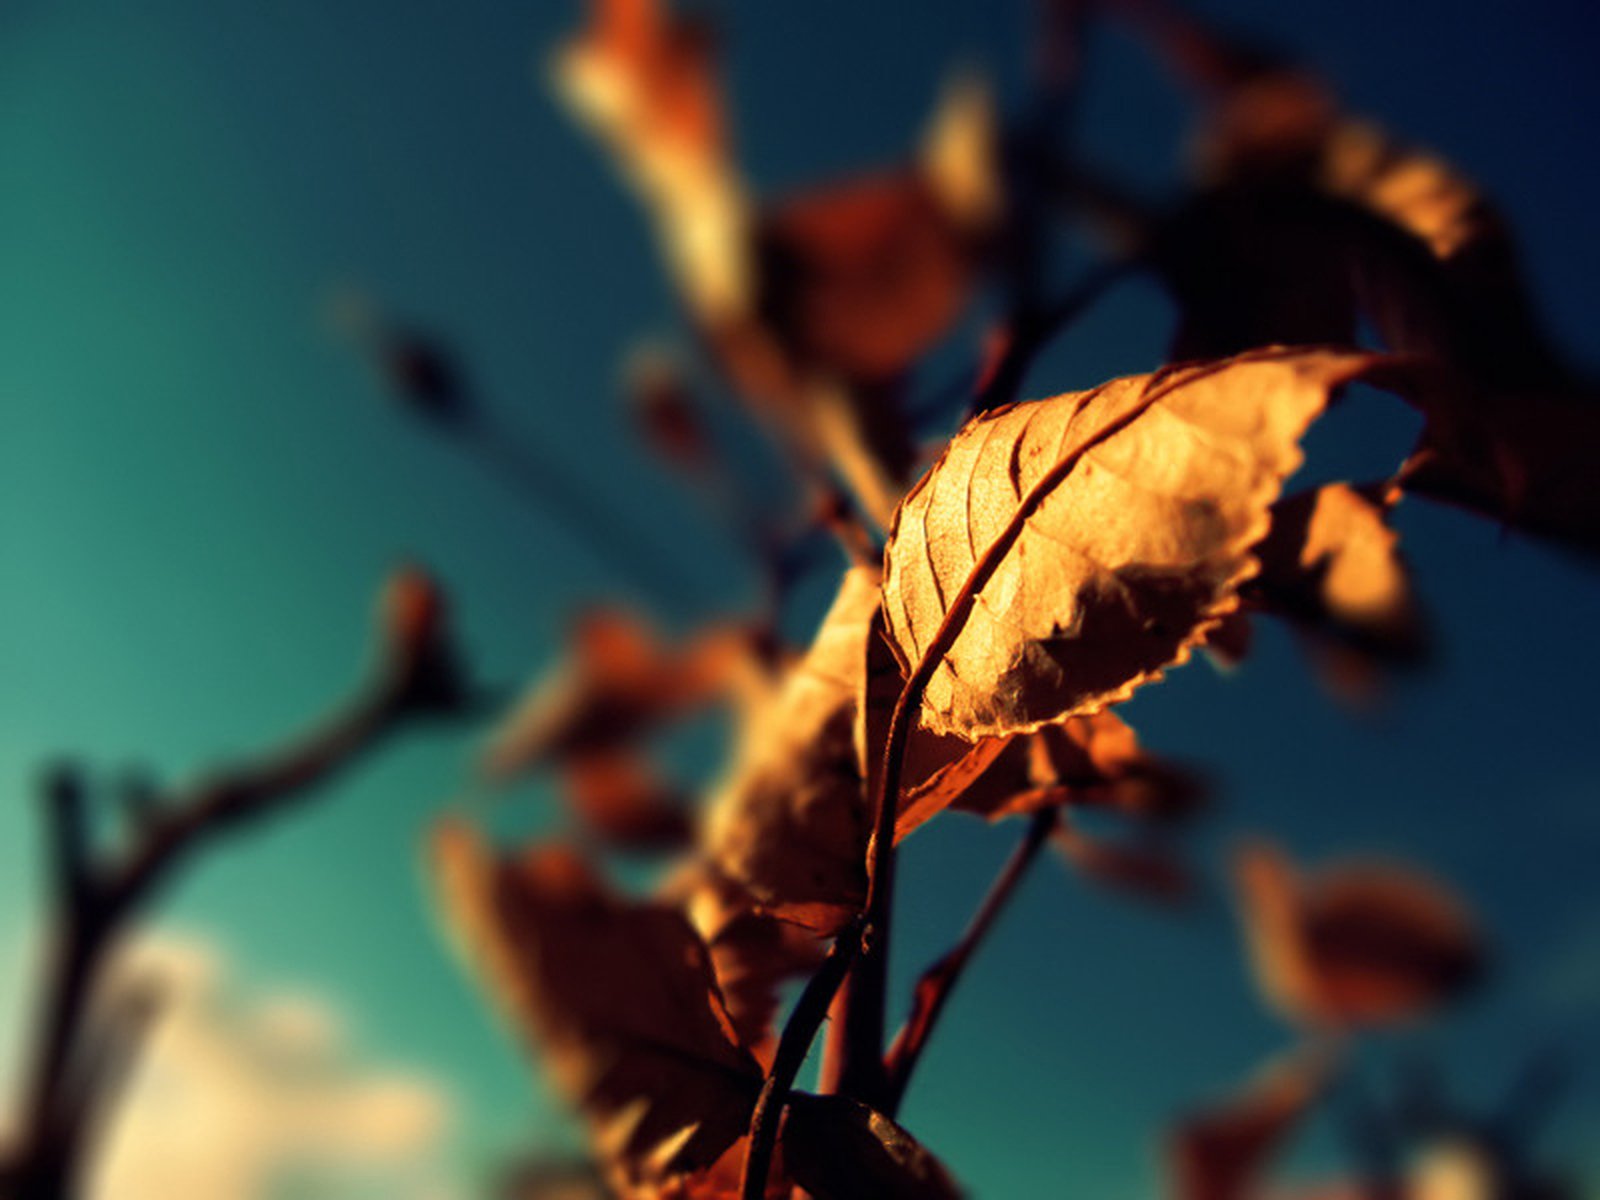 20 autumn wallpapers for your Android | AndroidGuys